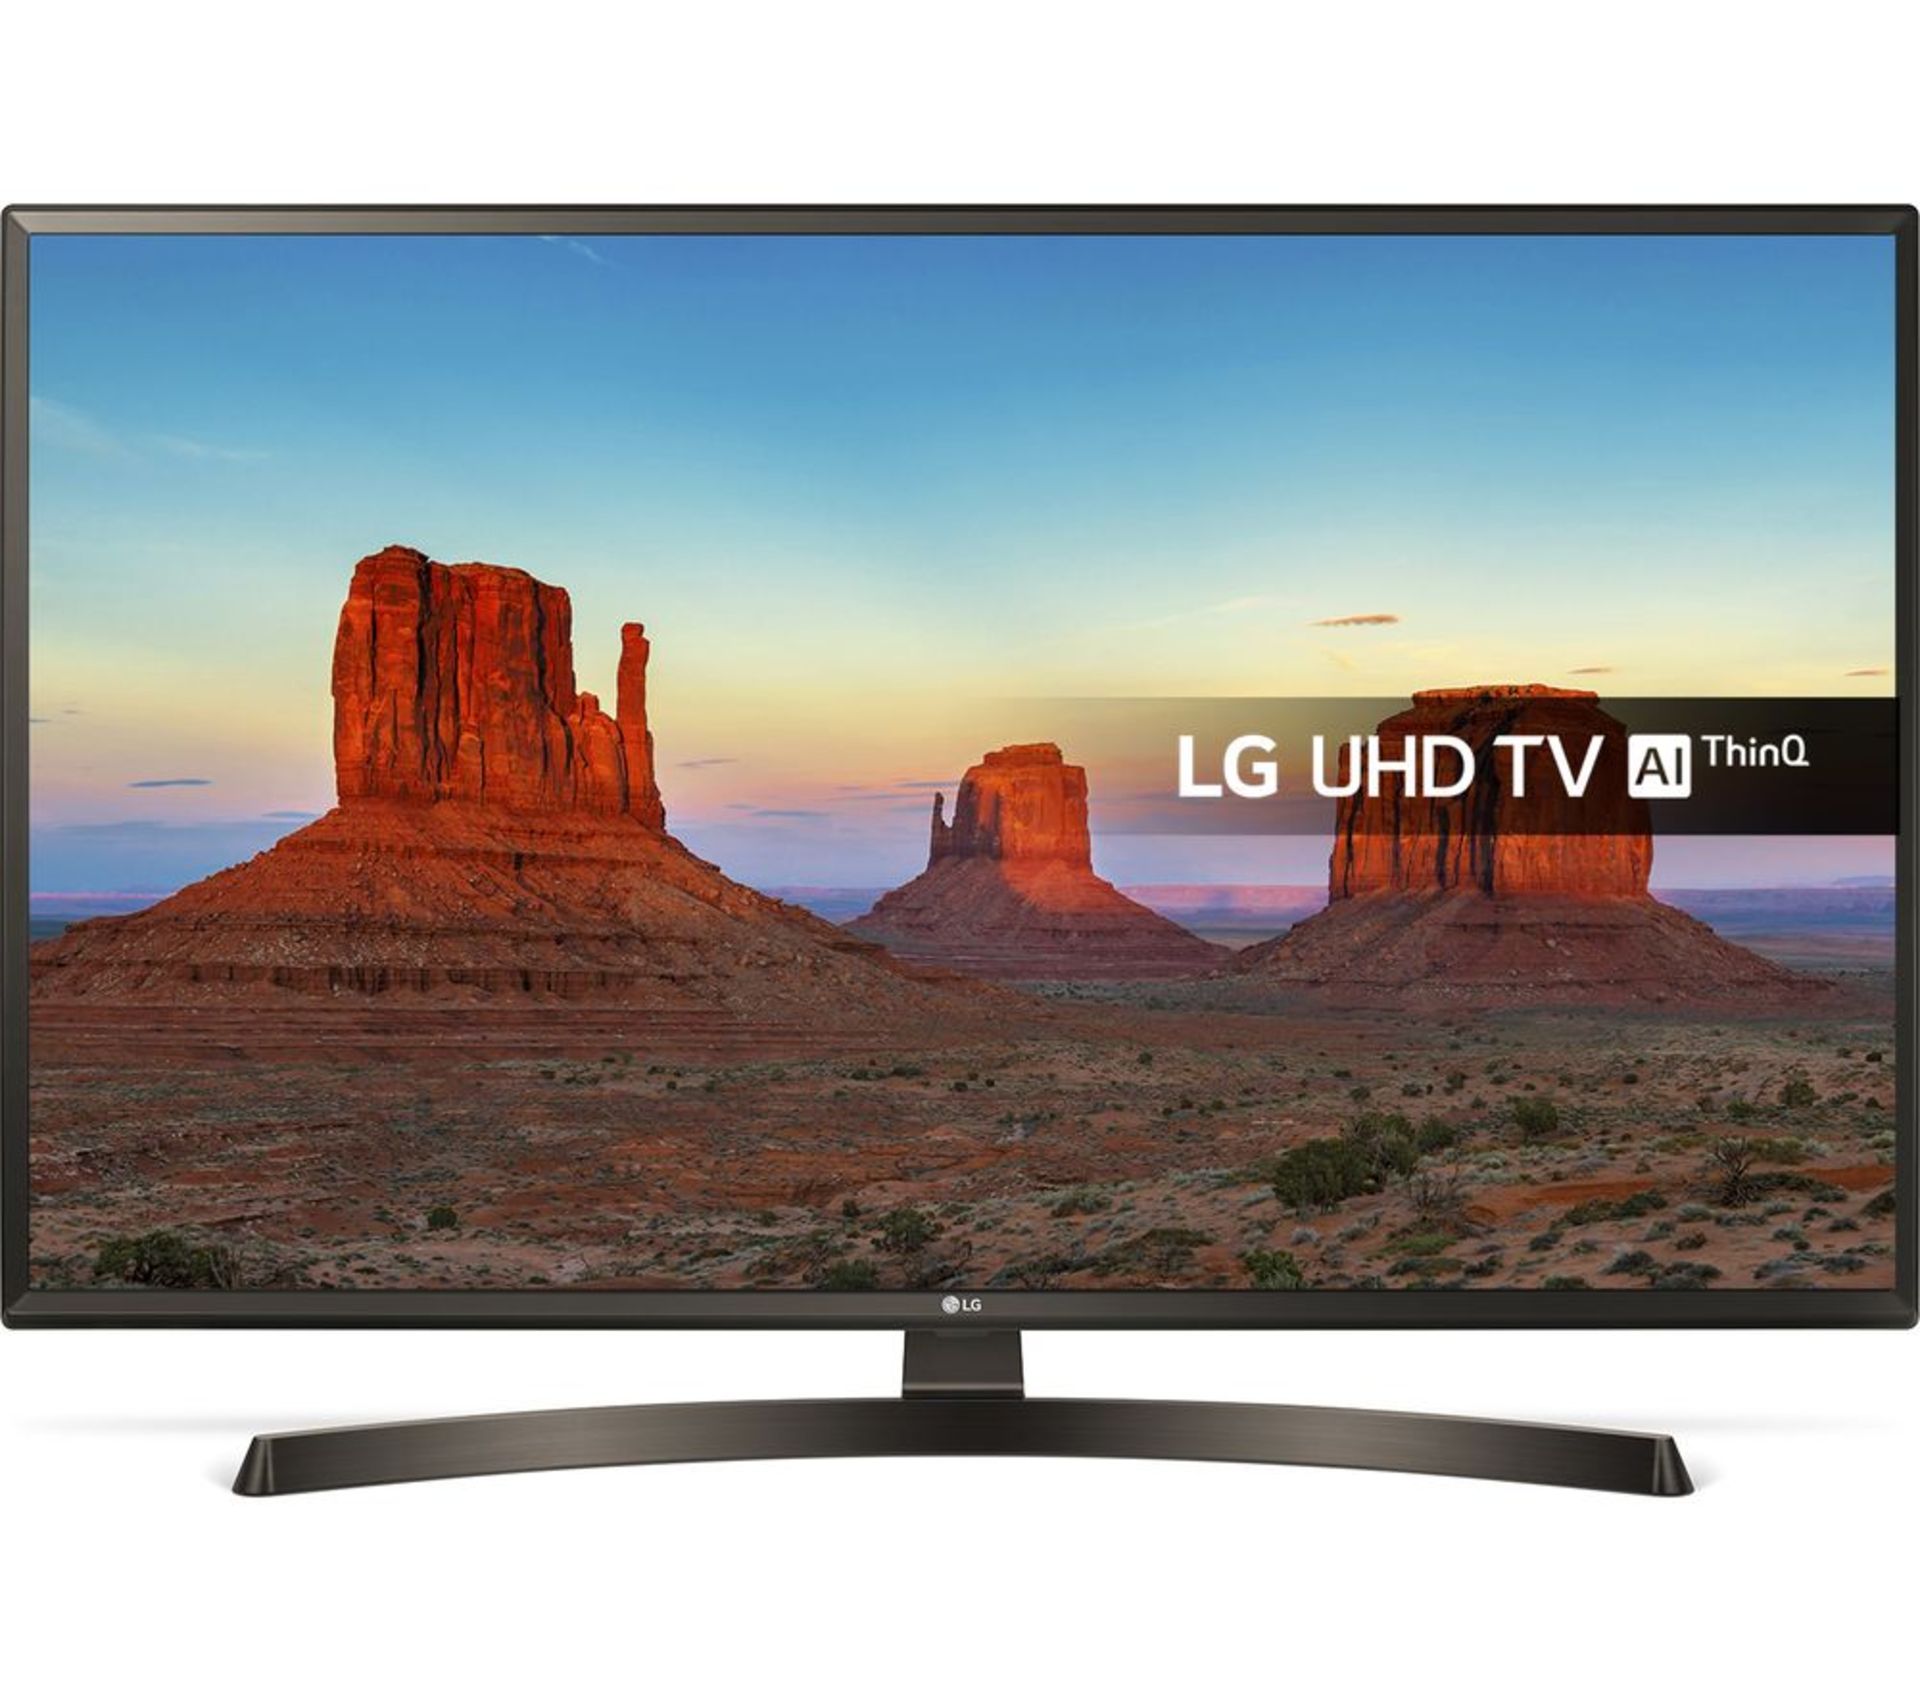 V Grade A LG 49 Inch ACTIVE HDR 4K ULTRA HD LED SMART TV WITH FREEVIEW HD & WEBOS 4.0 & WIFI - AI TV